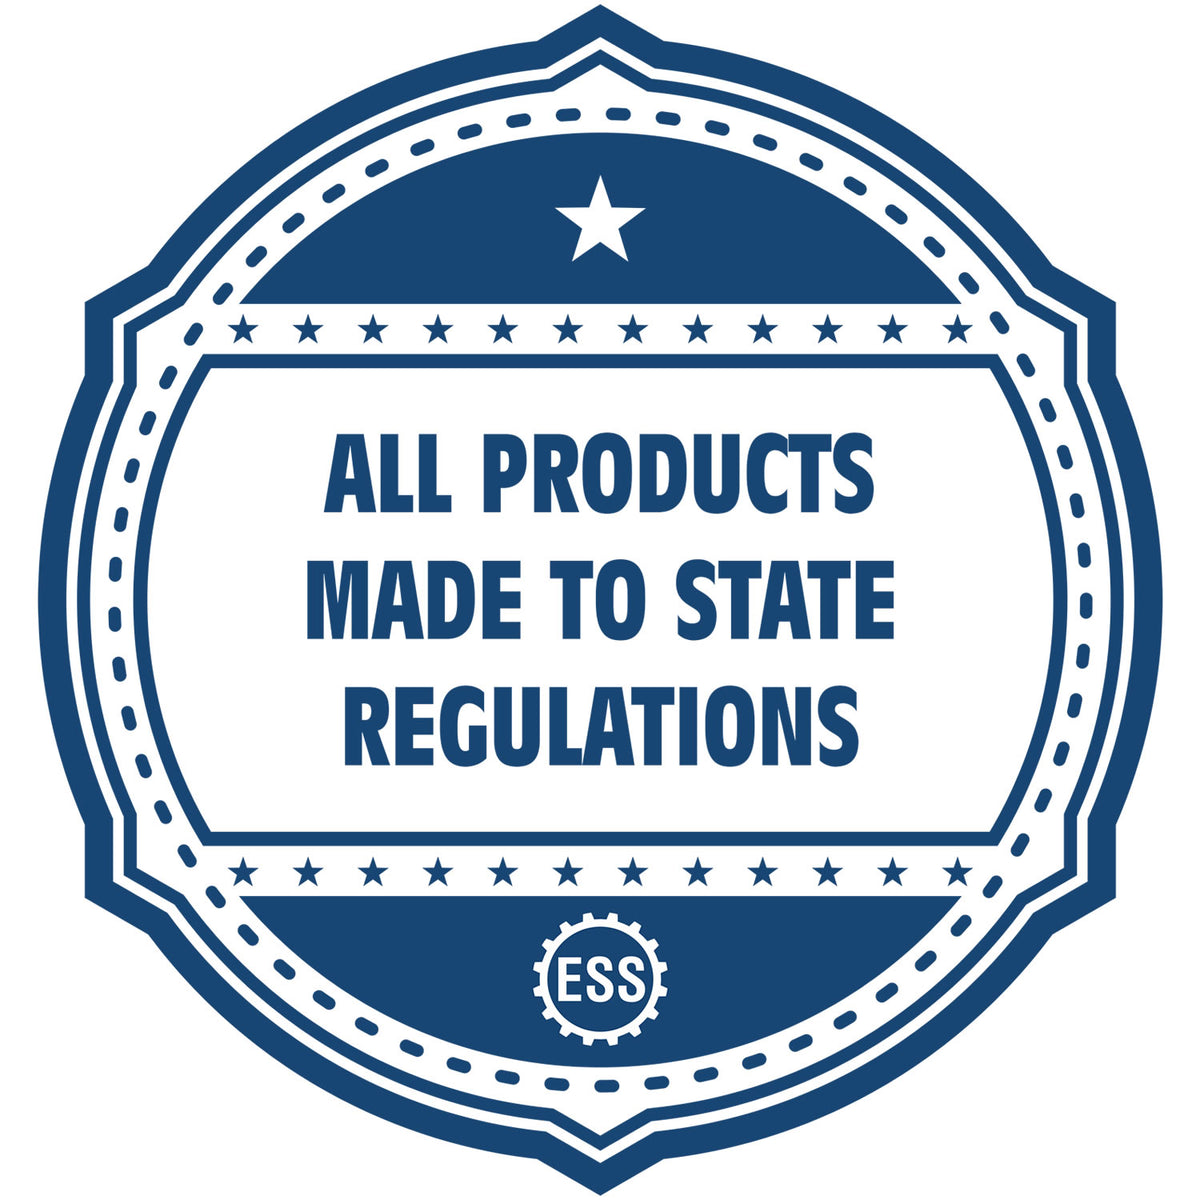 A blue icon or badge for the Rhode Island Professional Geologist Seal Stamp showing that this product is made in compliance with state regulations.